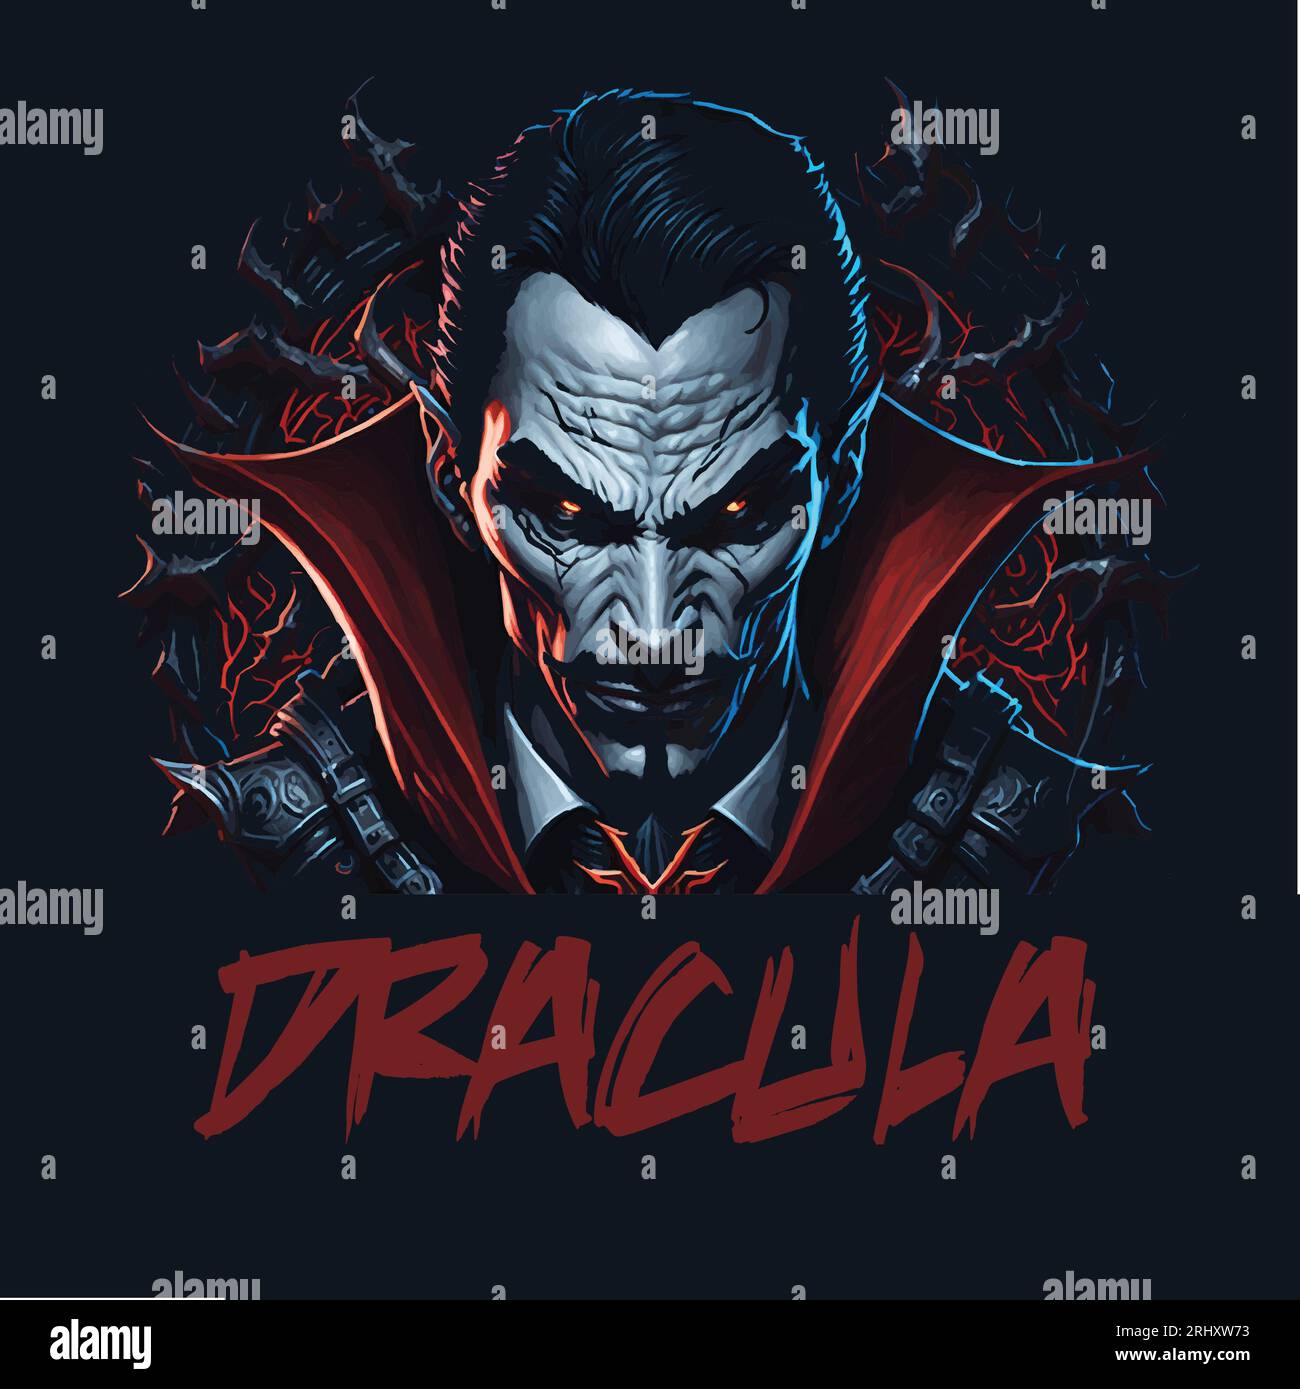 Dracula Gaming Logo High Quality Unique Stock Vector